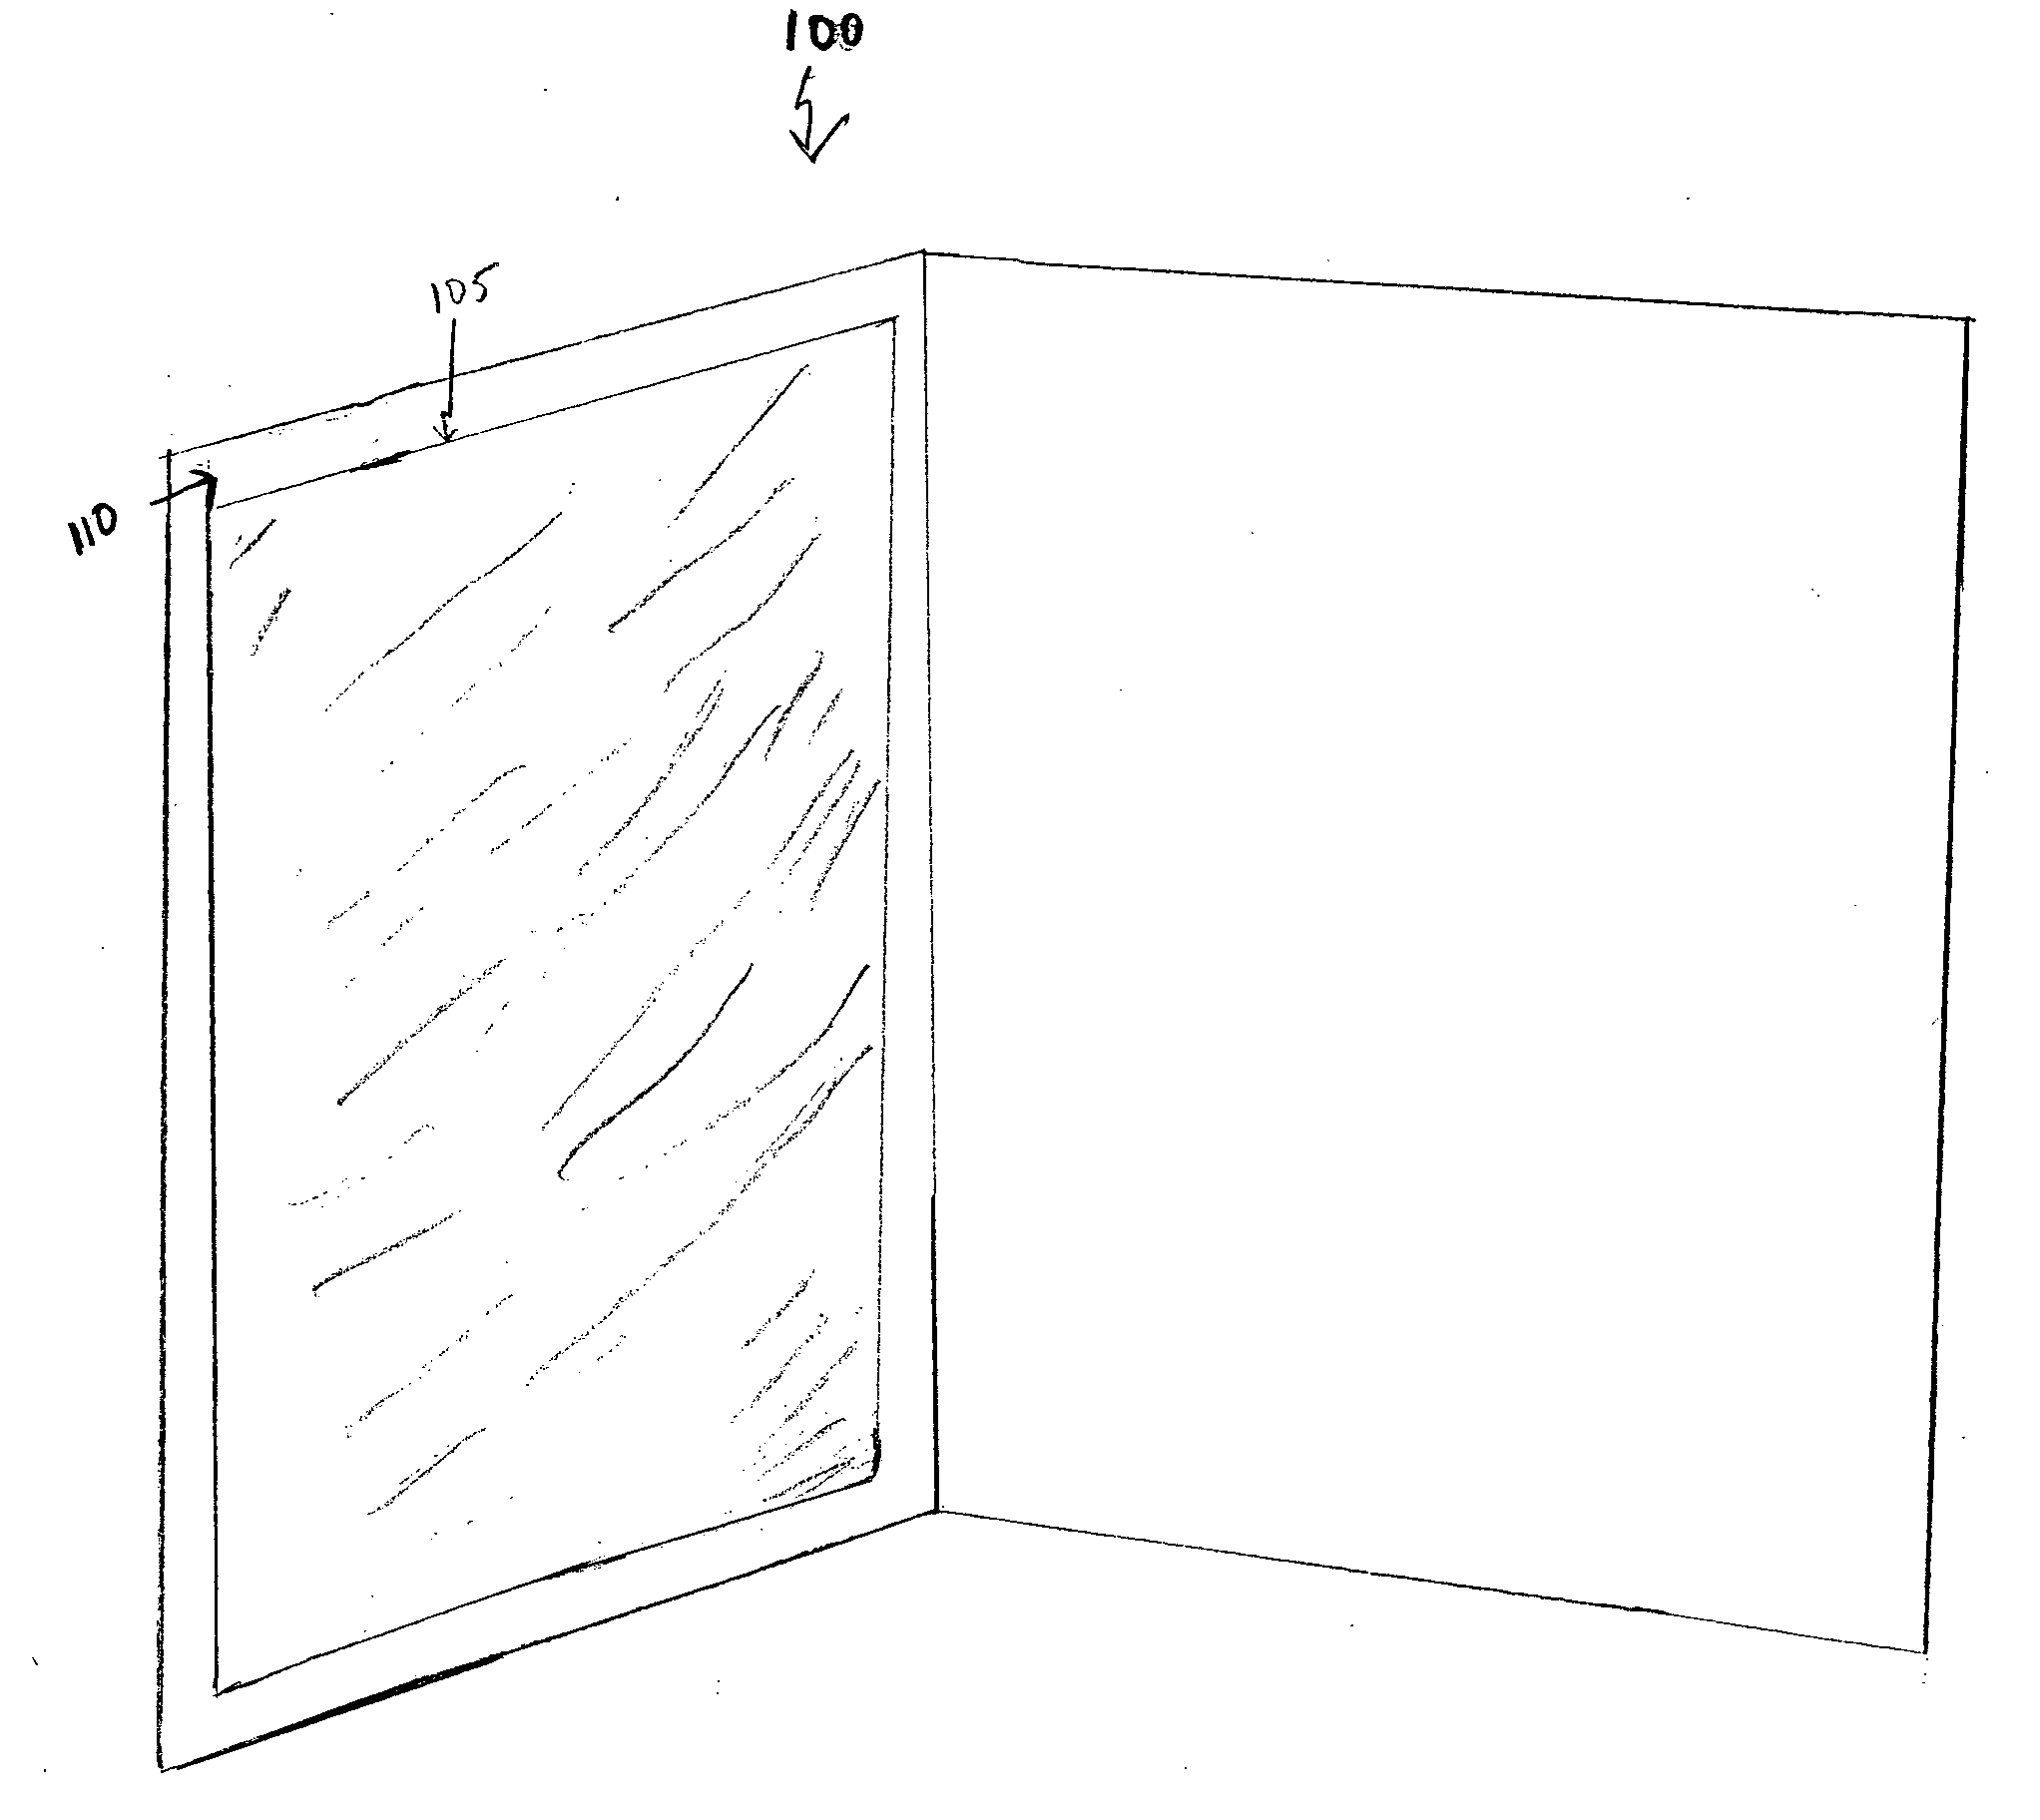 Method and apparatus for providing a card with penmanship improving indicia